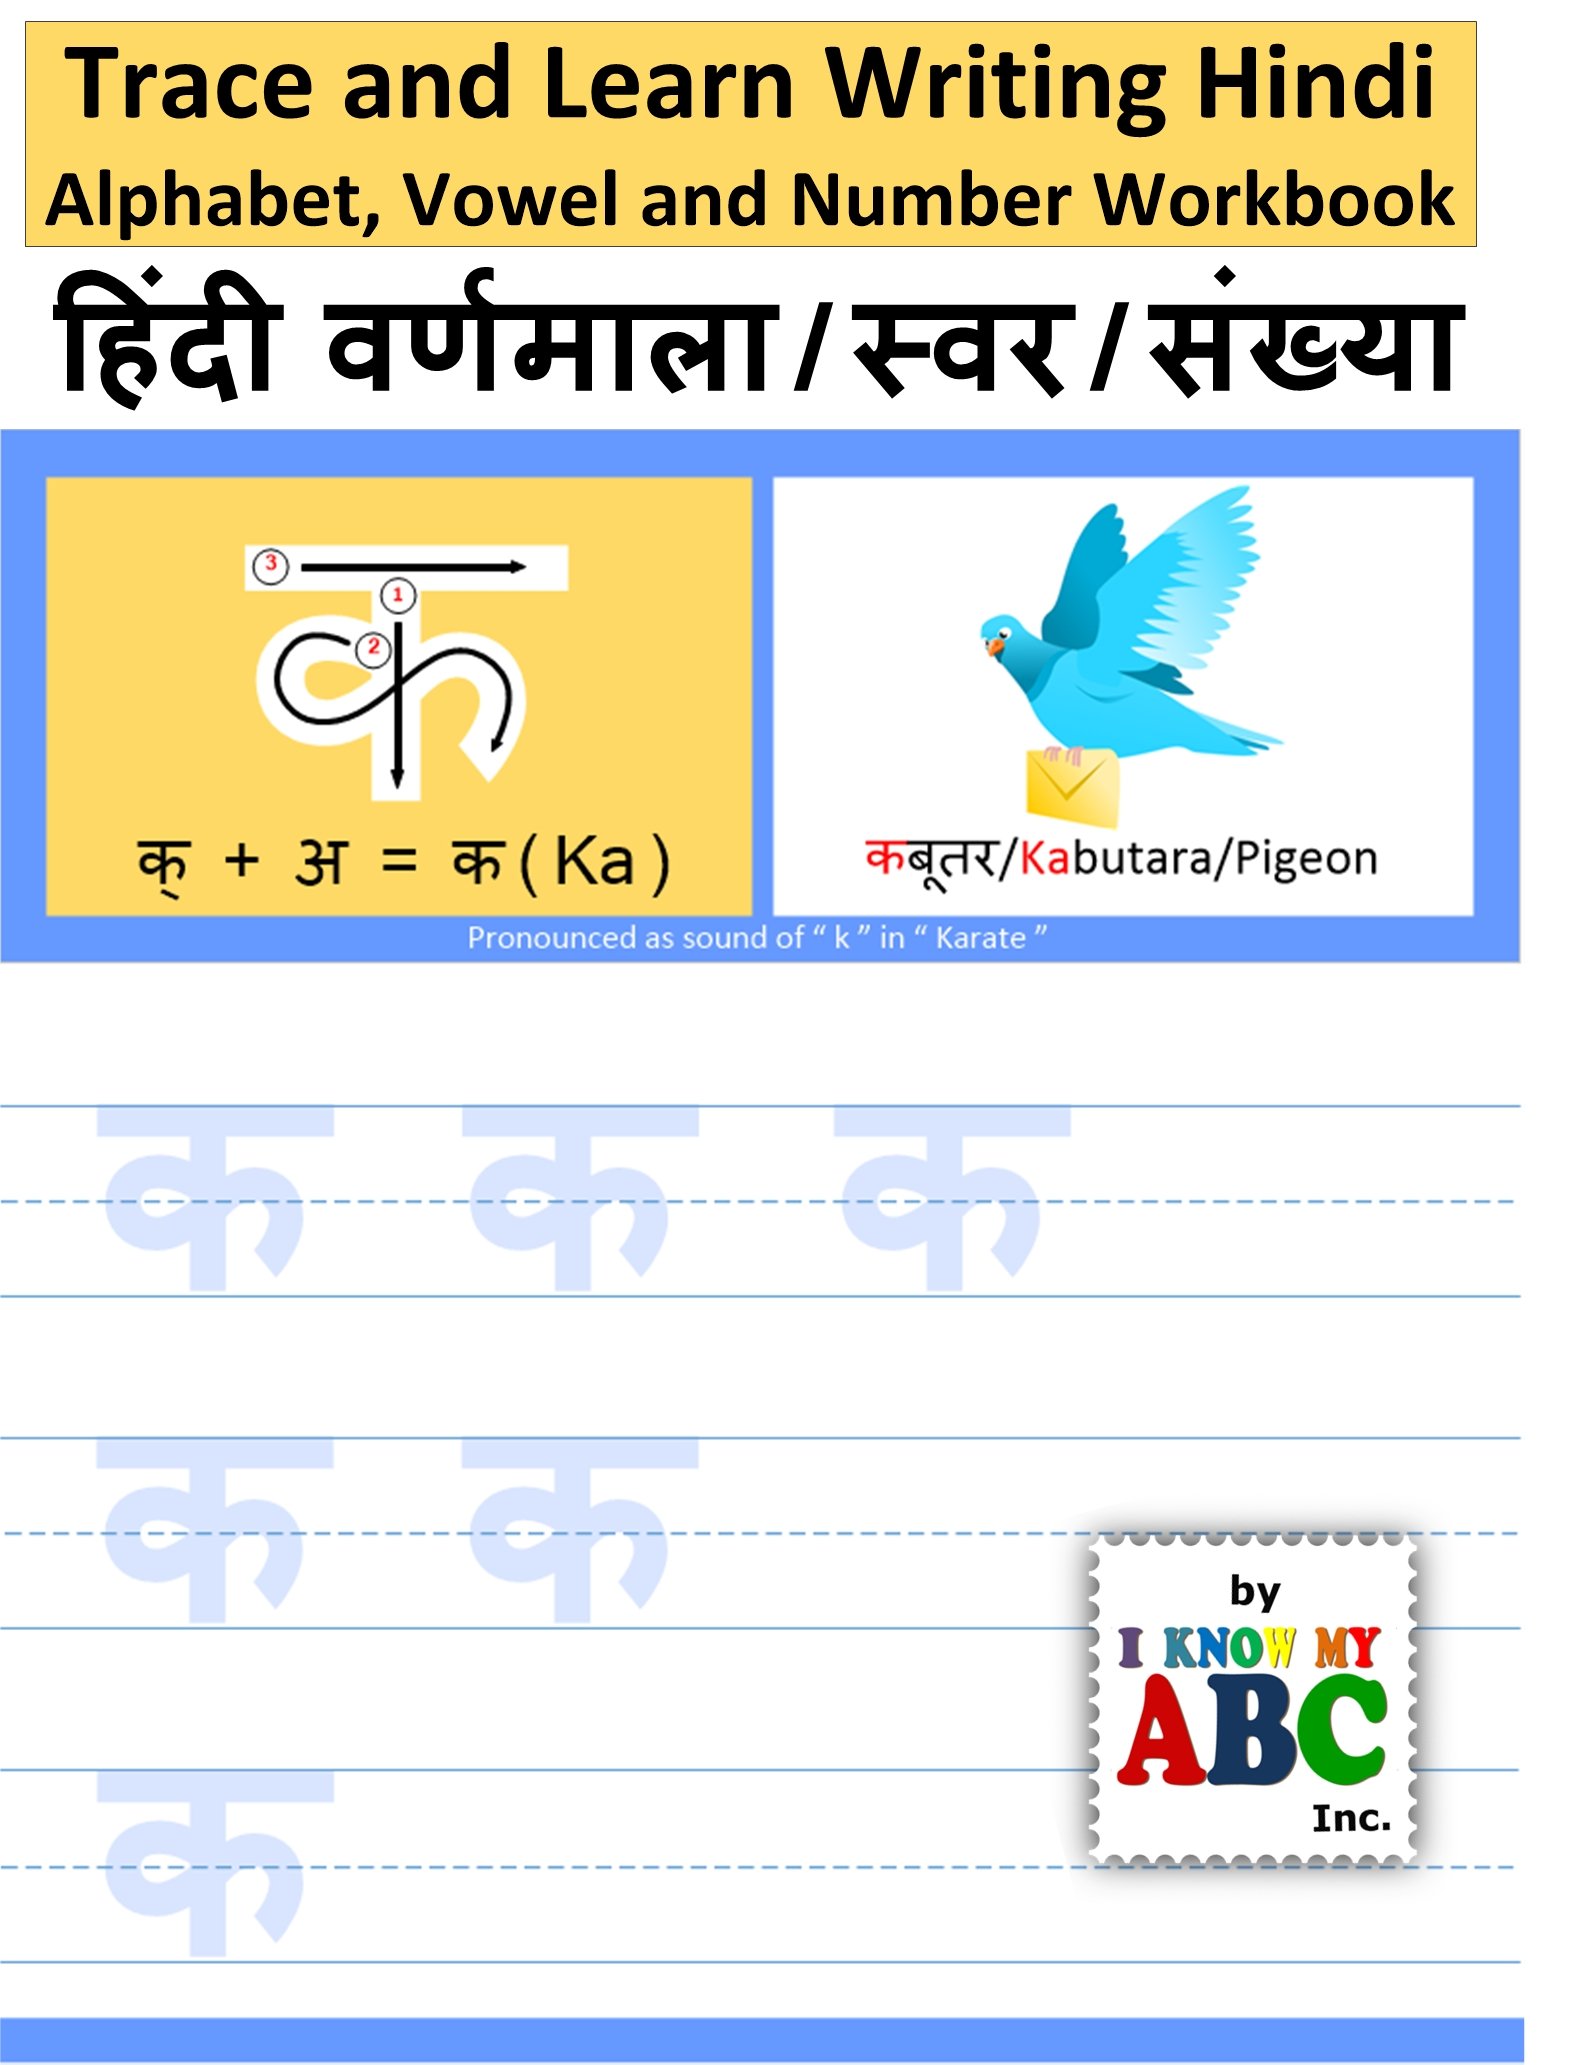 Trace & Learn Writing Hindi Alphabet, Vowel and Number Workbook by I Know  My ABC, Color Copy